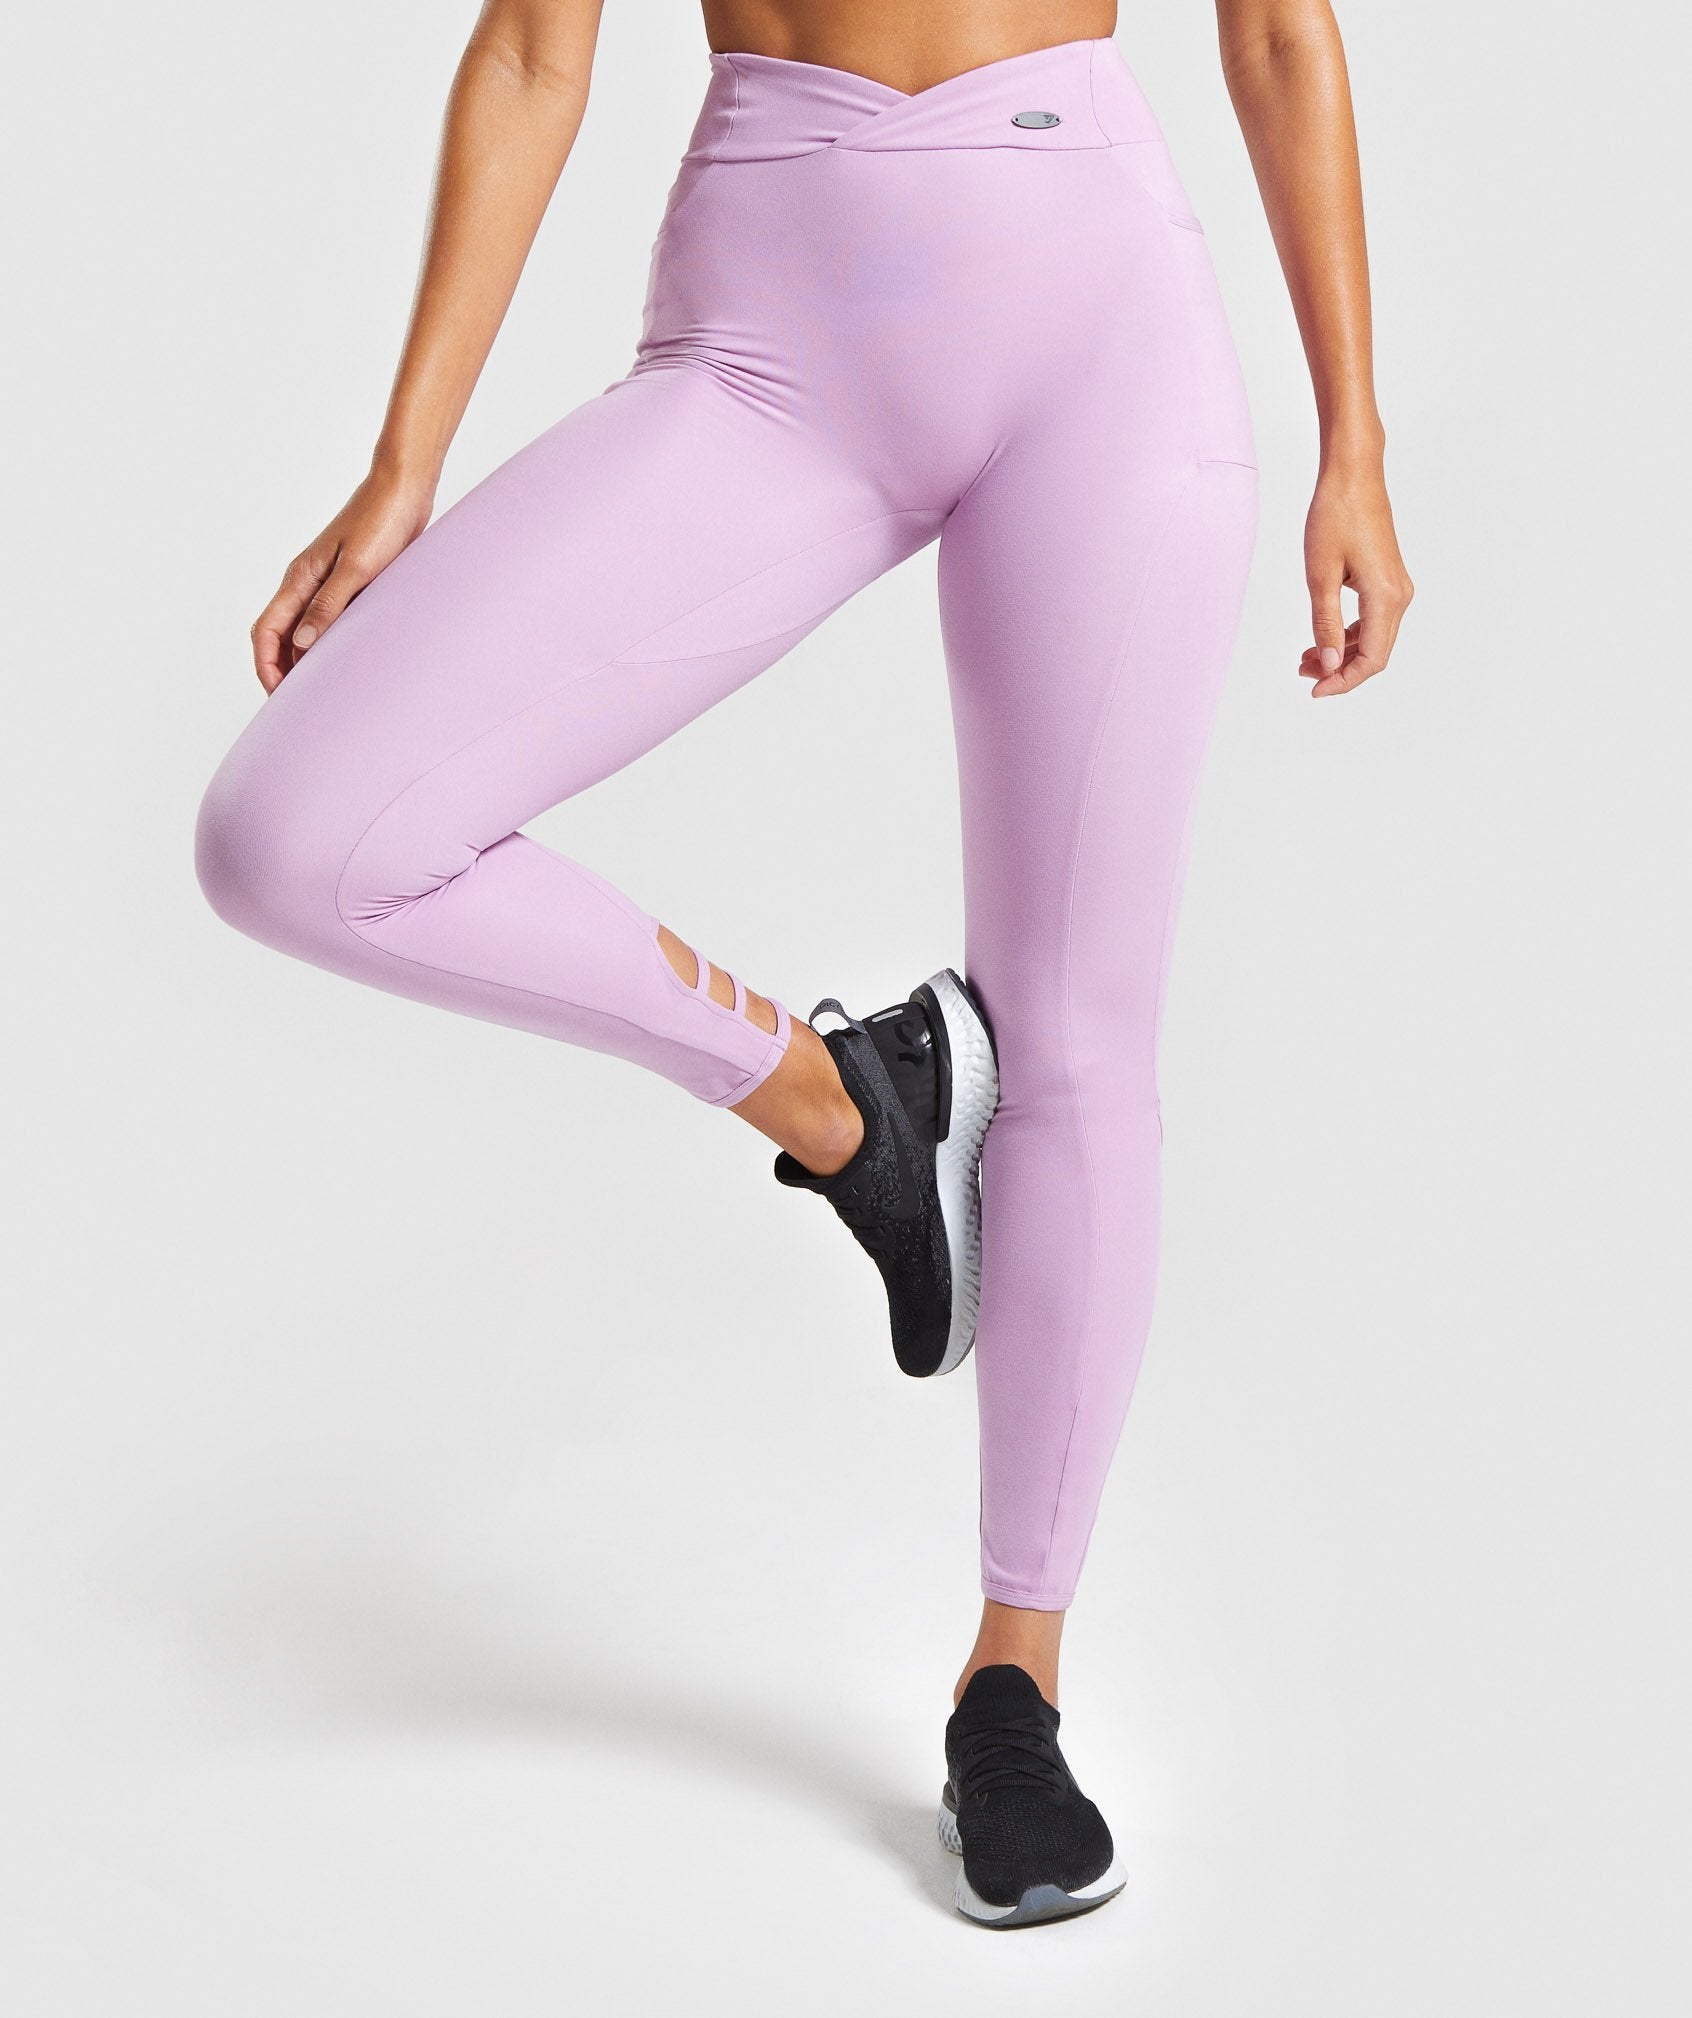 Poise Leggings in Pink - view 1